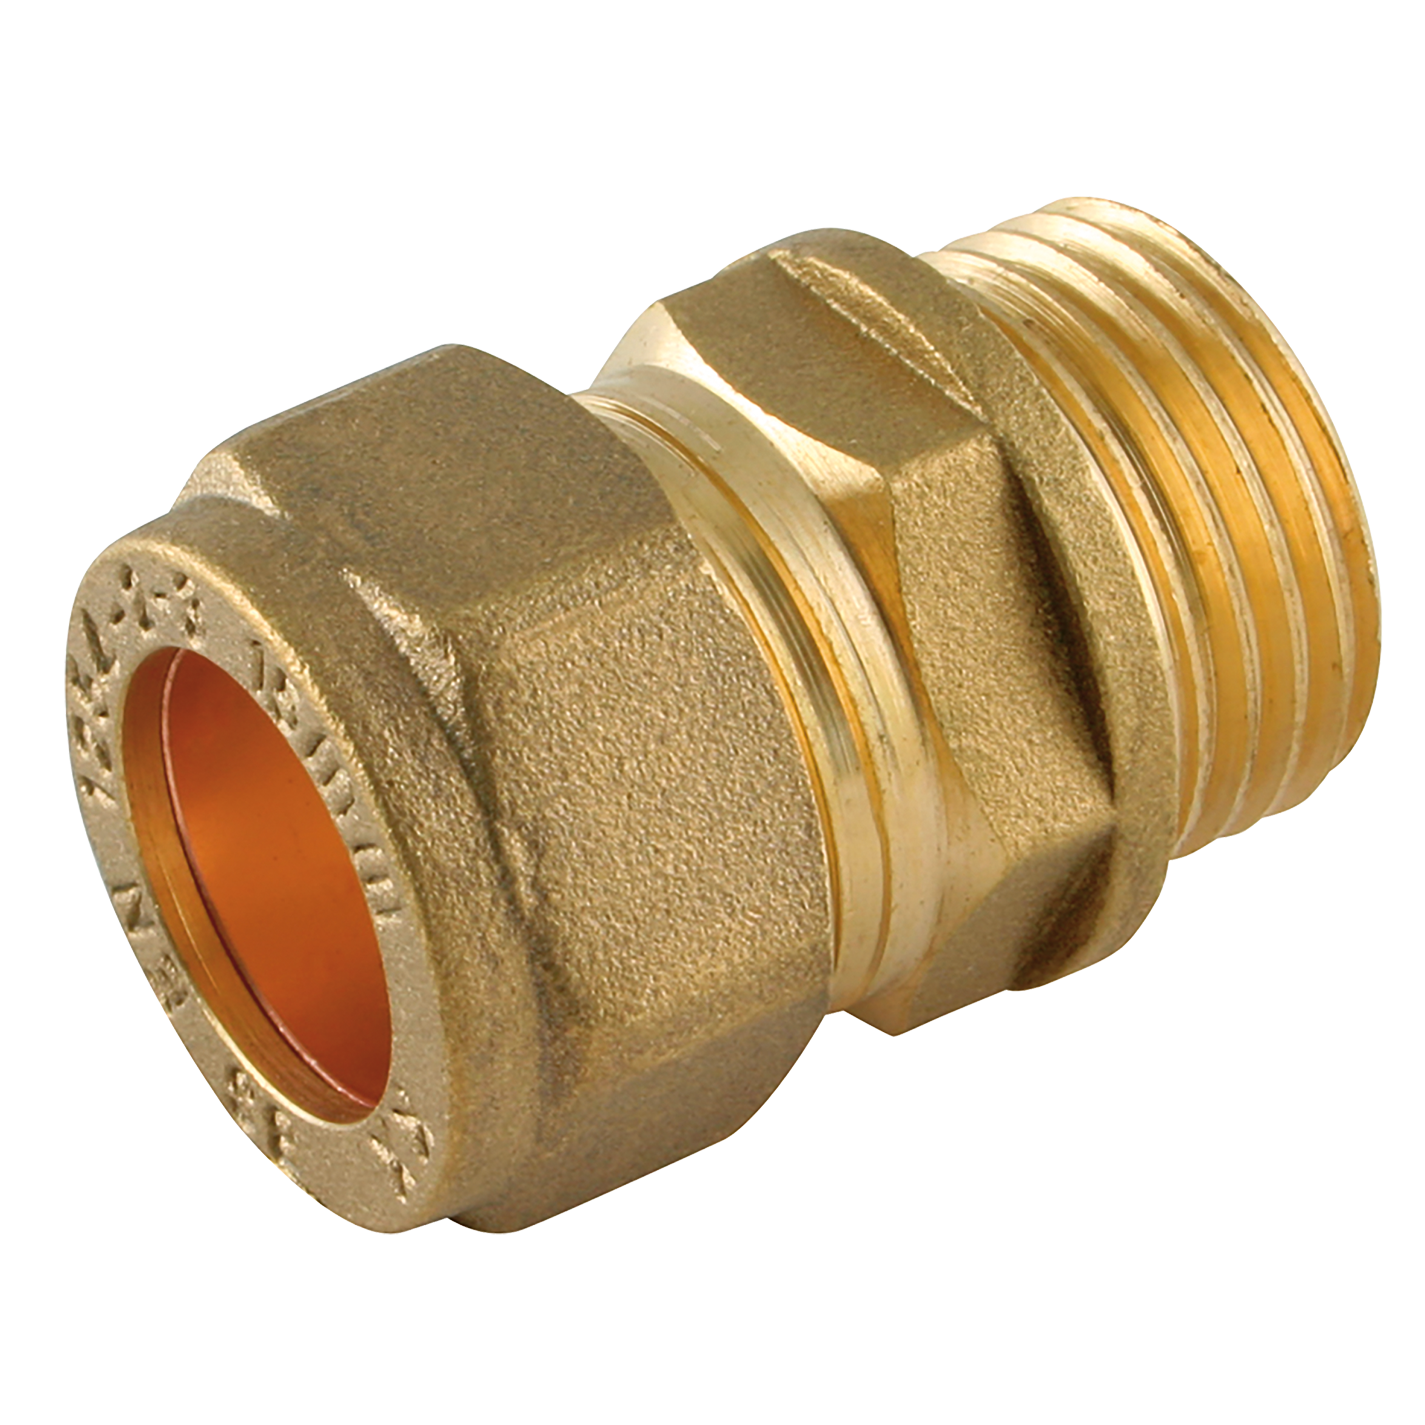 1.1/2" BSPP Male x 42mm OD Coupling